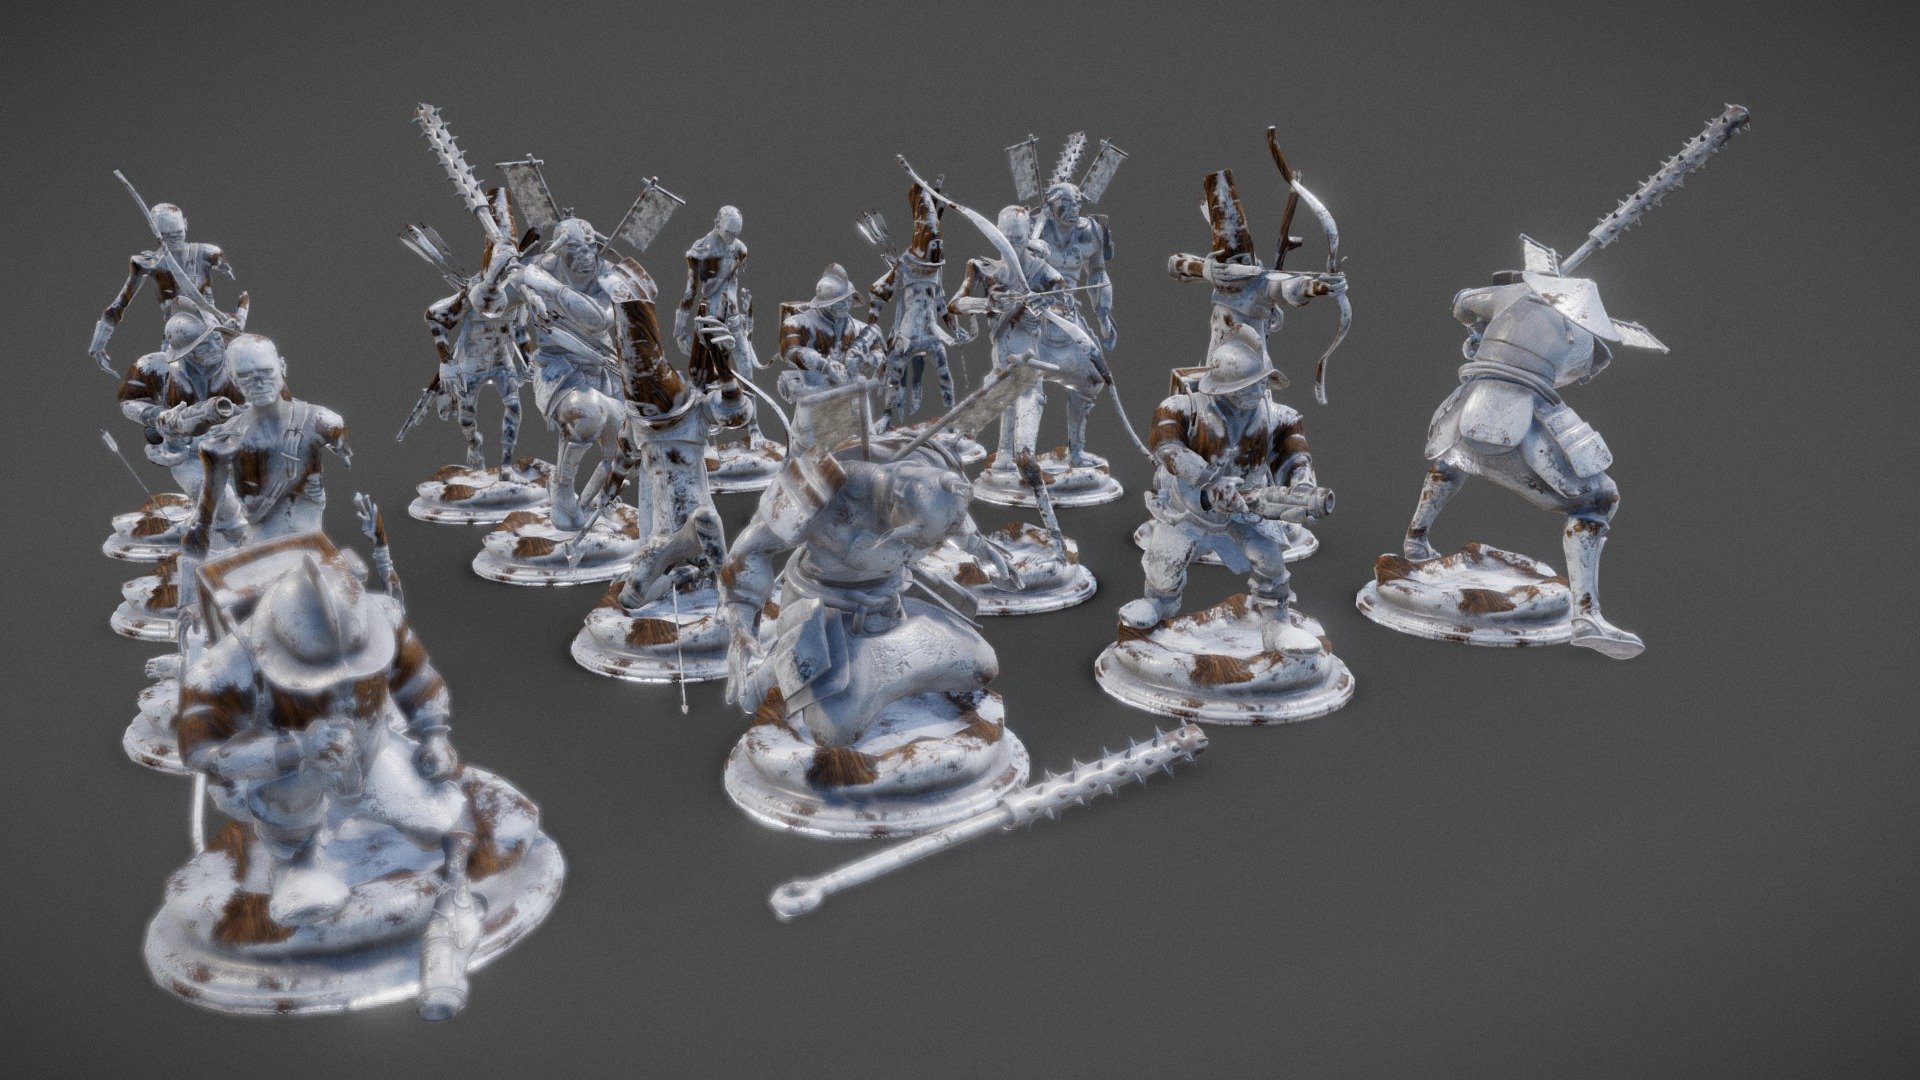 RPG Action Miniatures